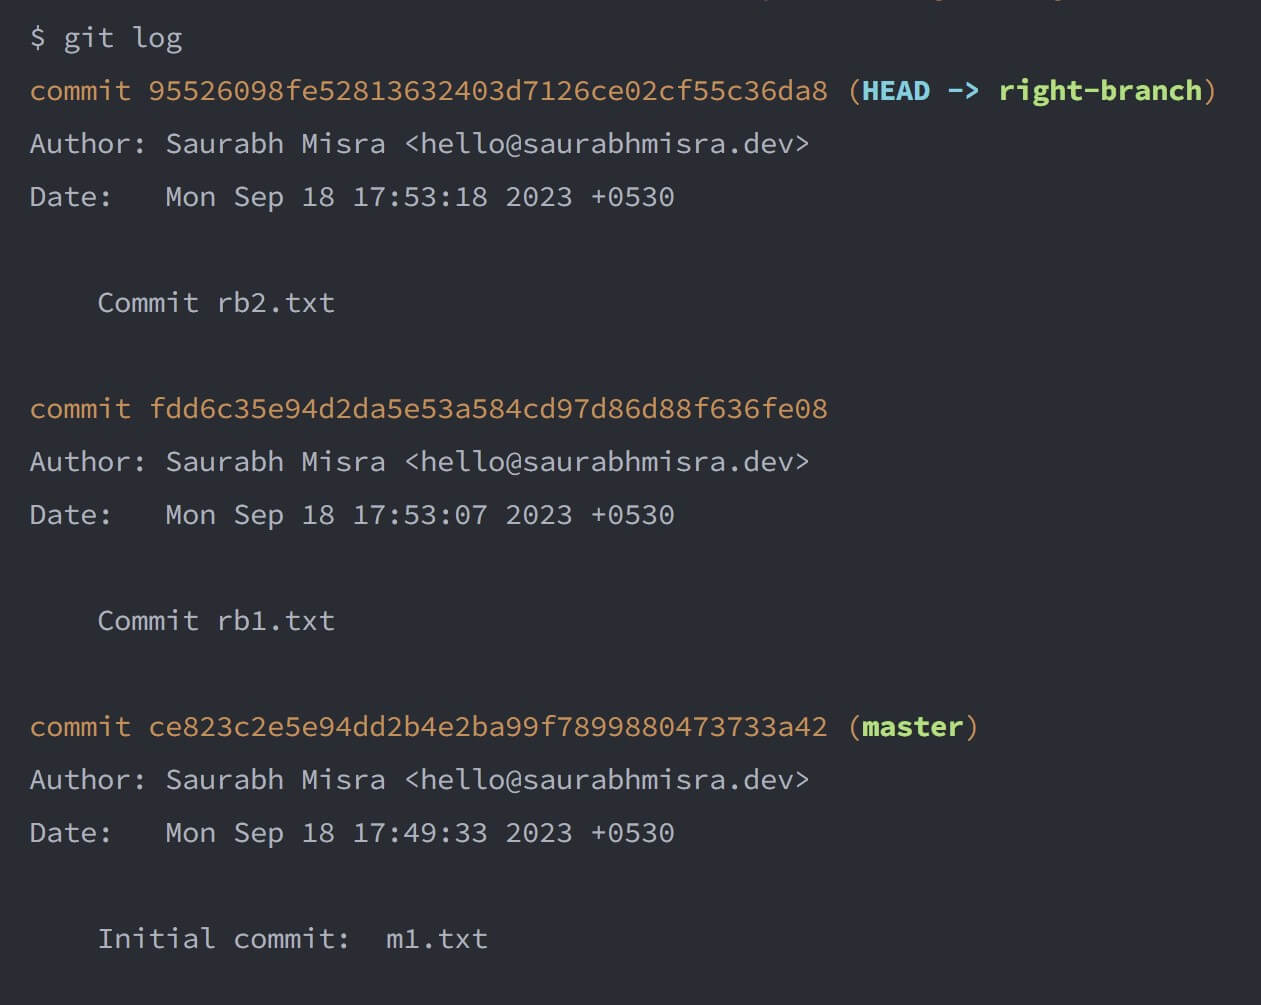 screenshot of the terminal window showing the output of the git log command and the initial state of the right-branch that has two commits.